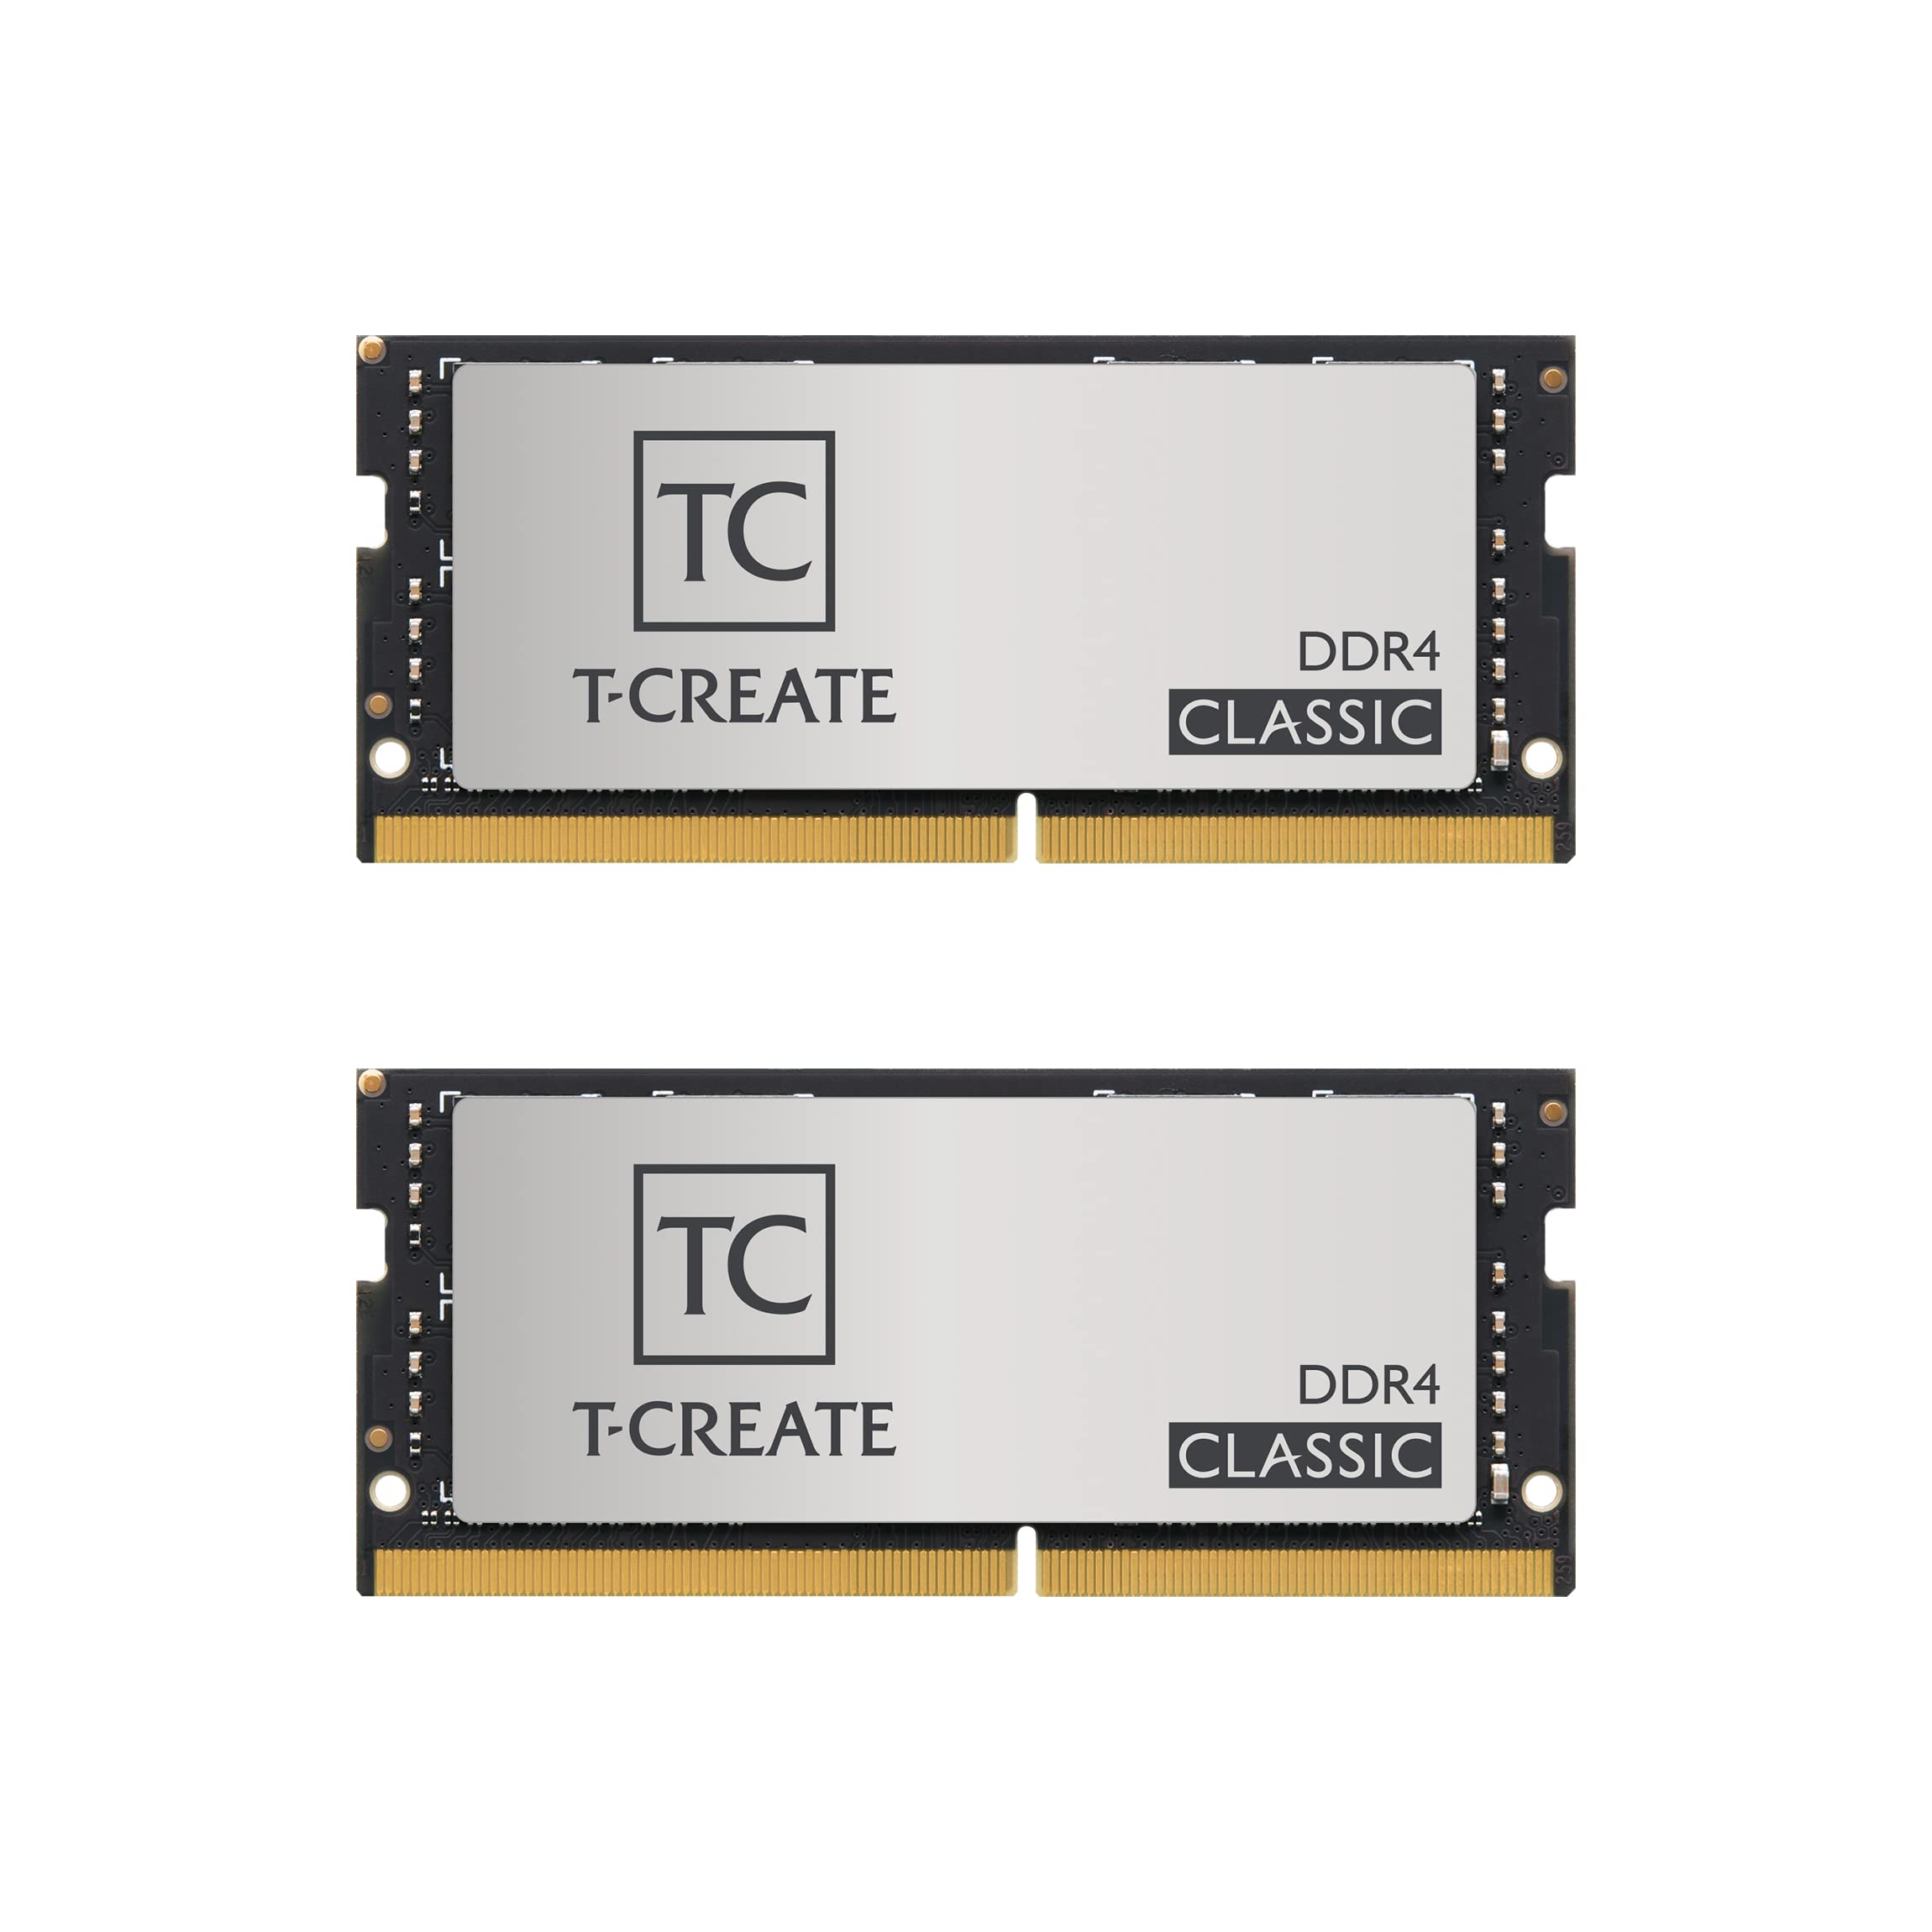 TEAMGROUP T-Create Classic DDR4 SODIMM 32GB キット 2 x 16GB 3200MHz PC4- 25600 260ピン CL22 ノートパソコンメ